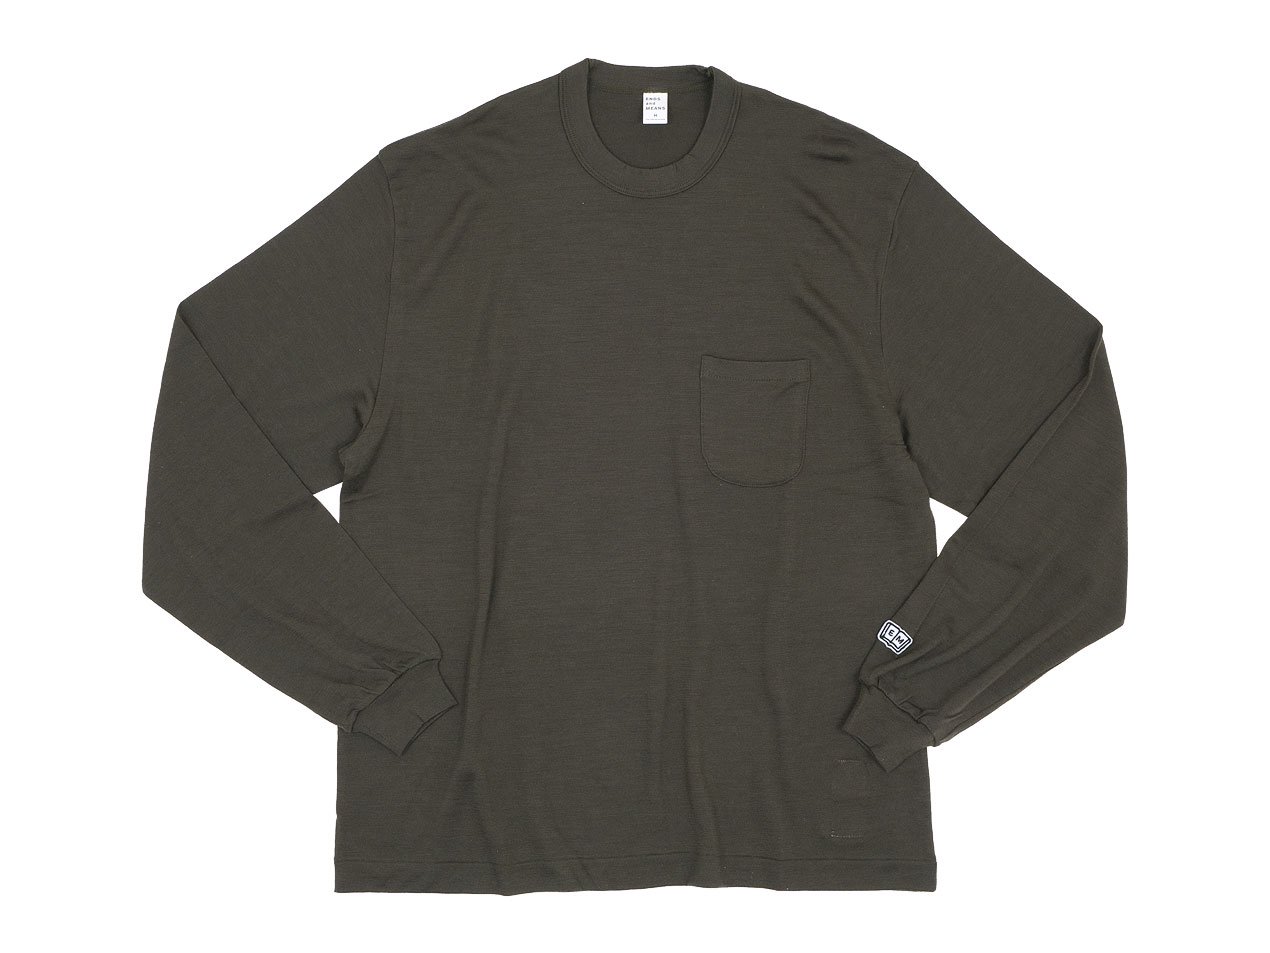 ENDS and MEANS Pocket L/S tee KHAKI OLIVE